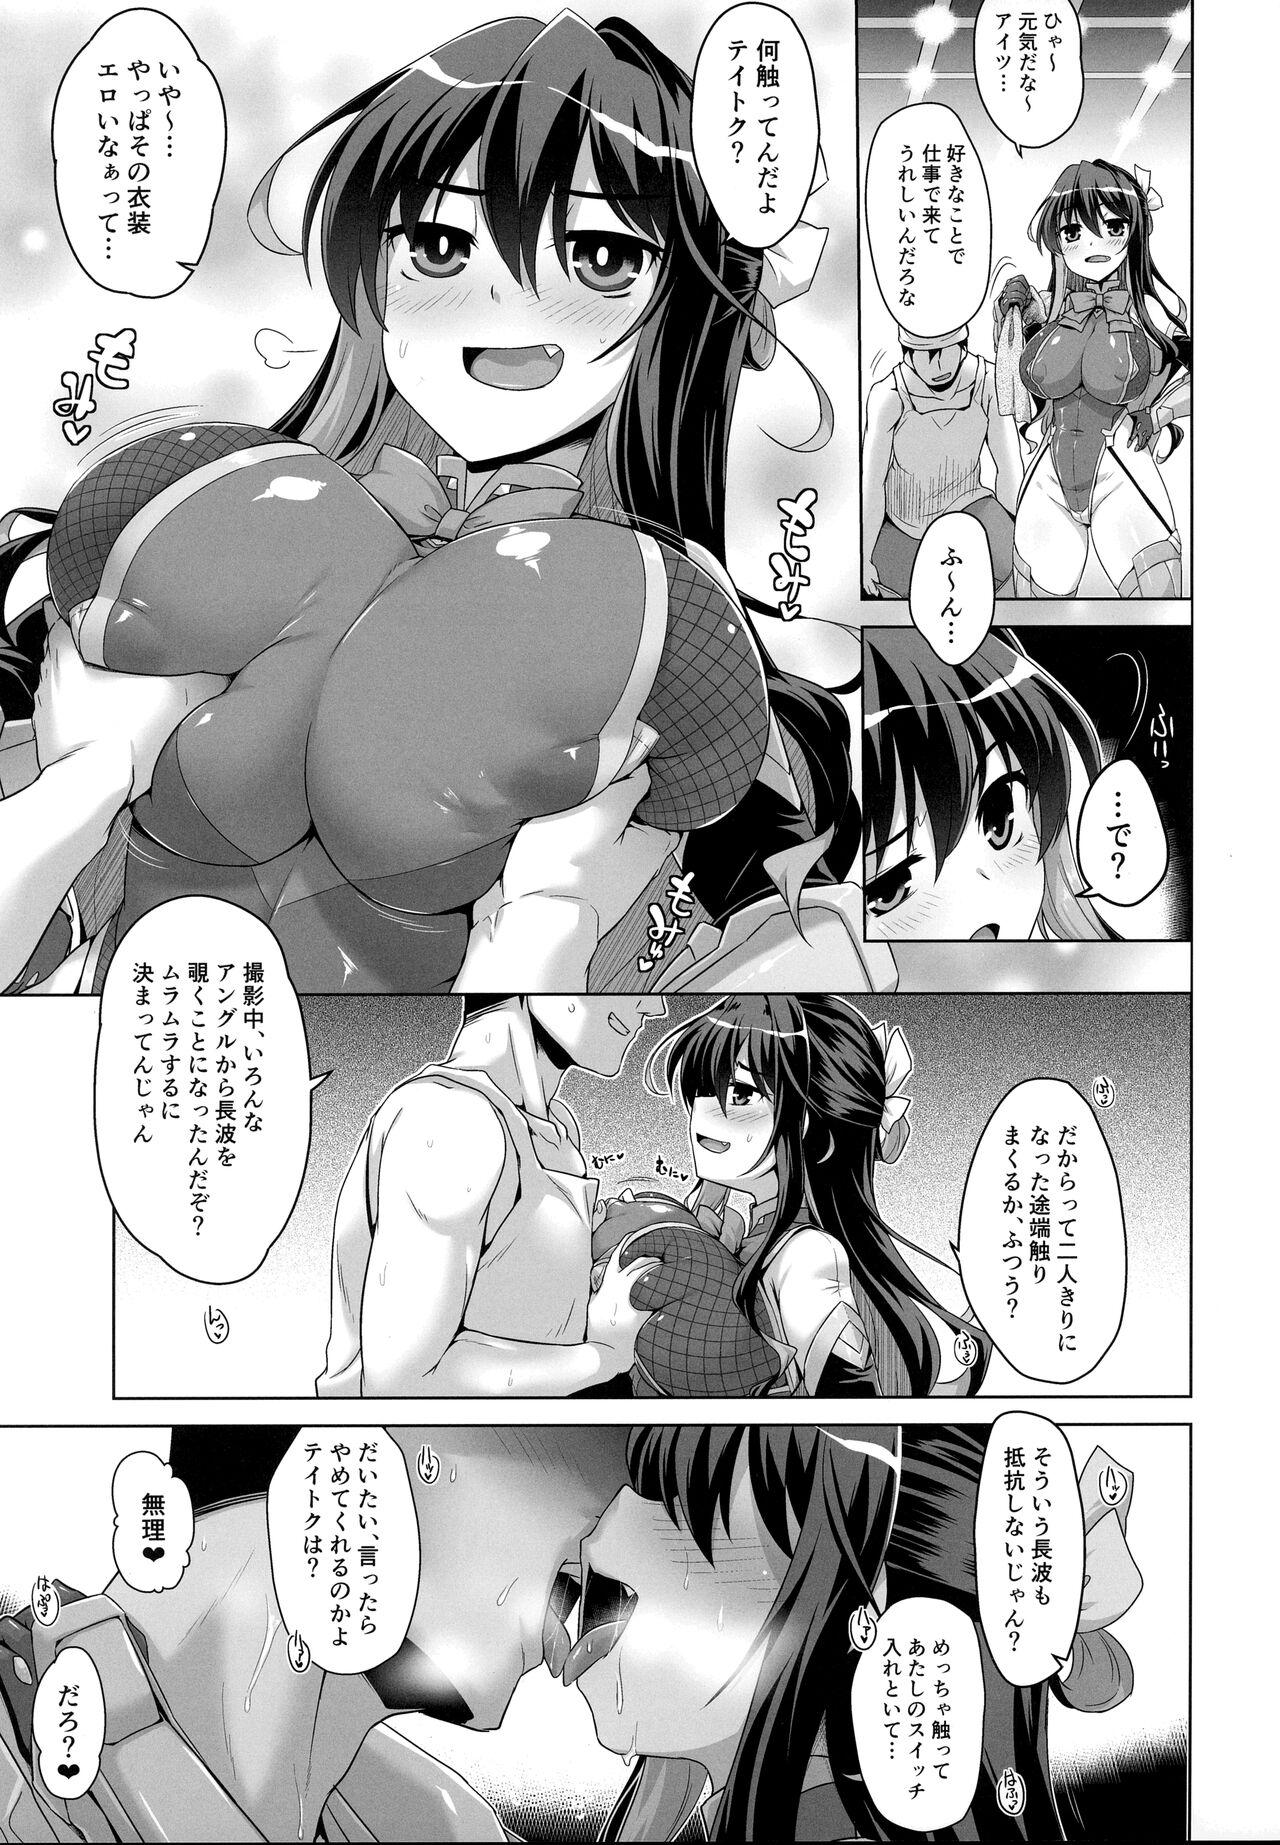 Mexicano みるきーDD～長波After shooting～ - Kantai collection Gemendo - Page 4